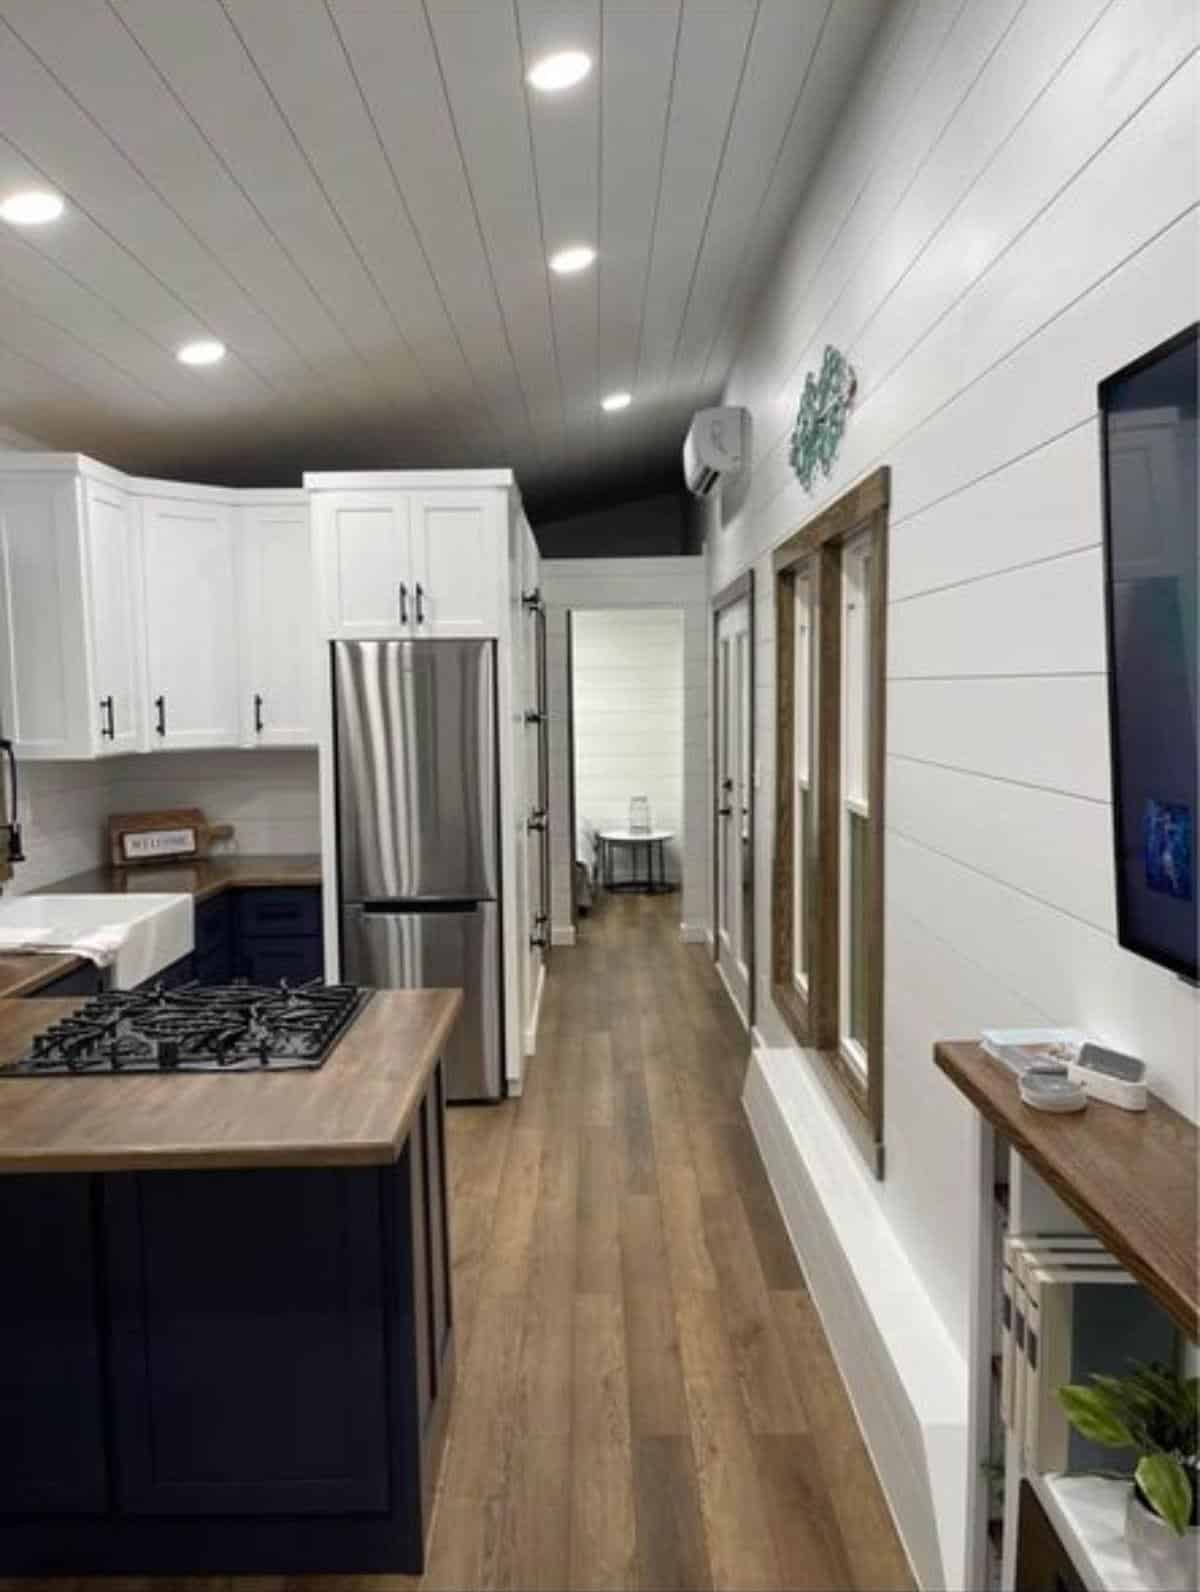 Gorgeous white interiors of 34’ Bumper Pull Tiny Home